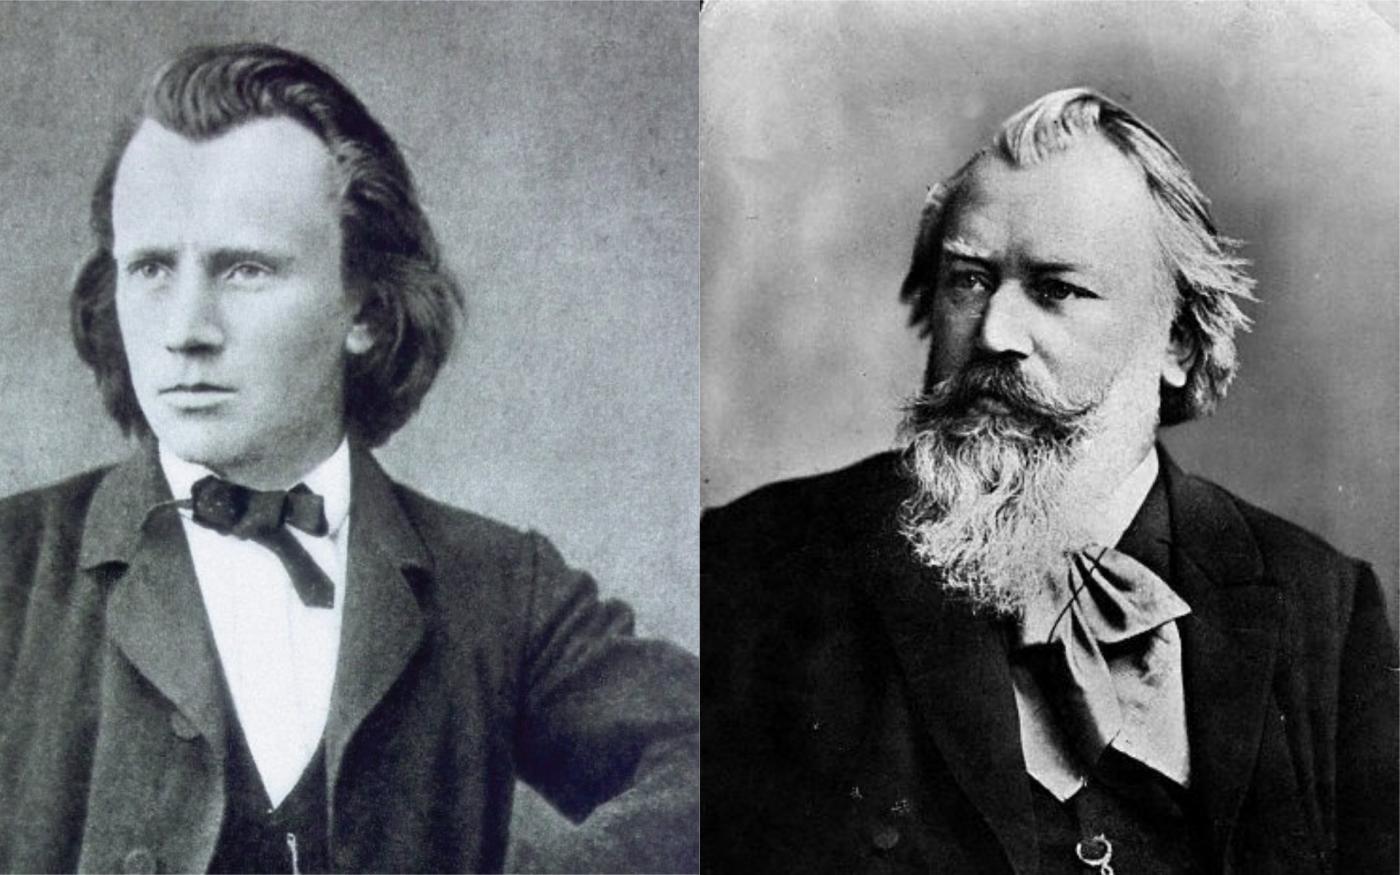 Side by side photos of Johannes Brahms with and without his famous beard.